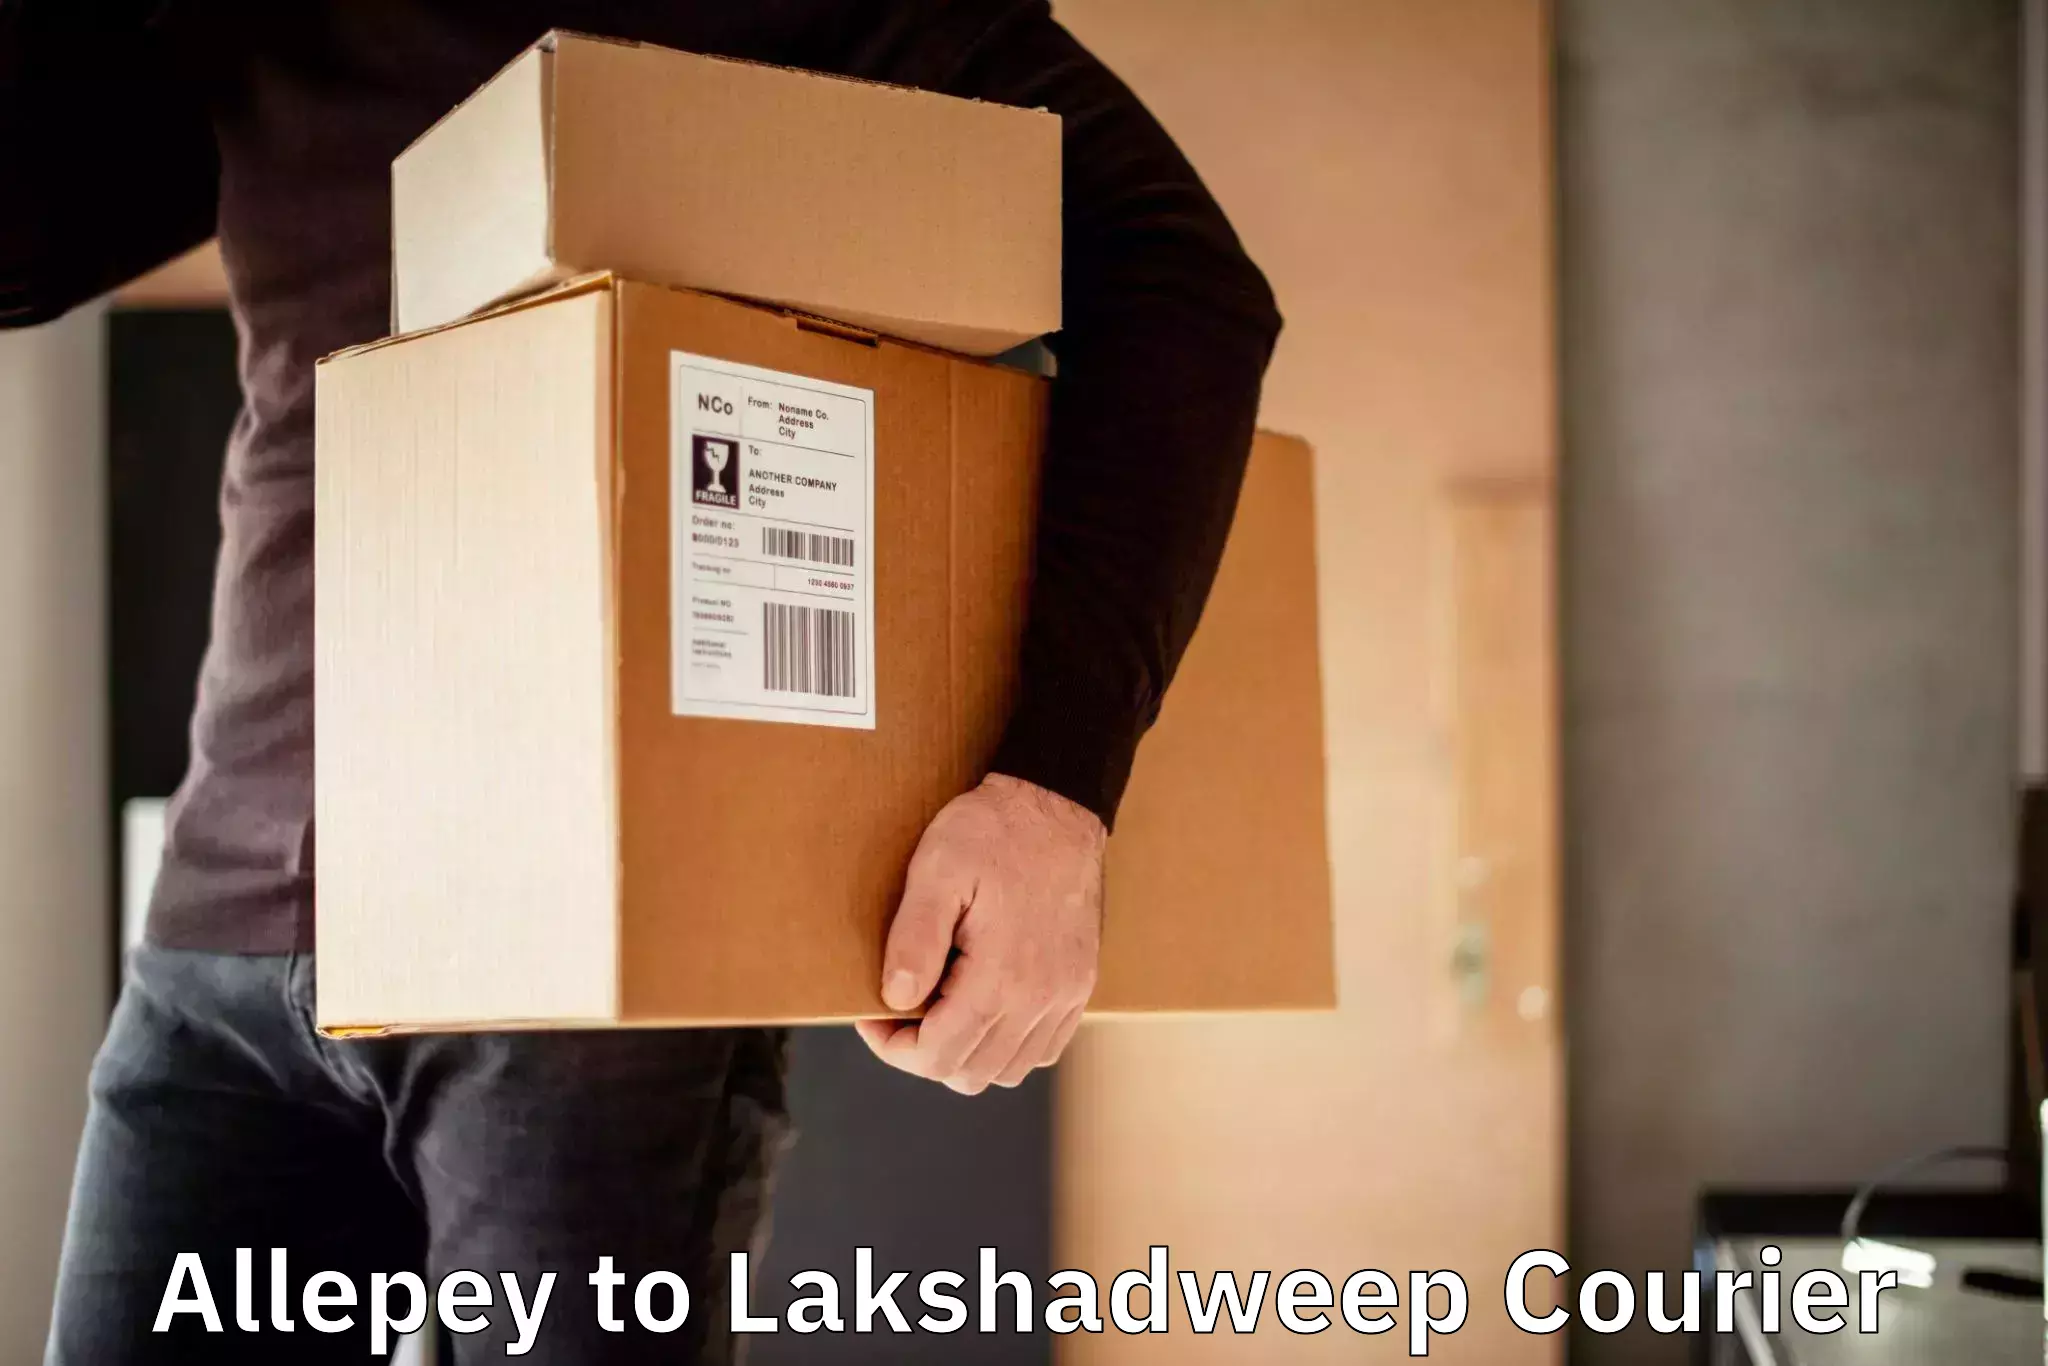 Multi-national courier services Allepey to Lakshadweep